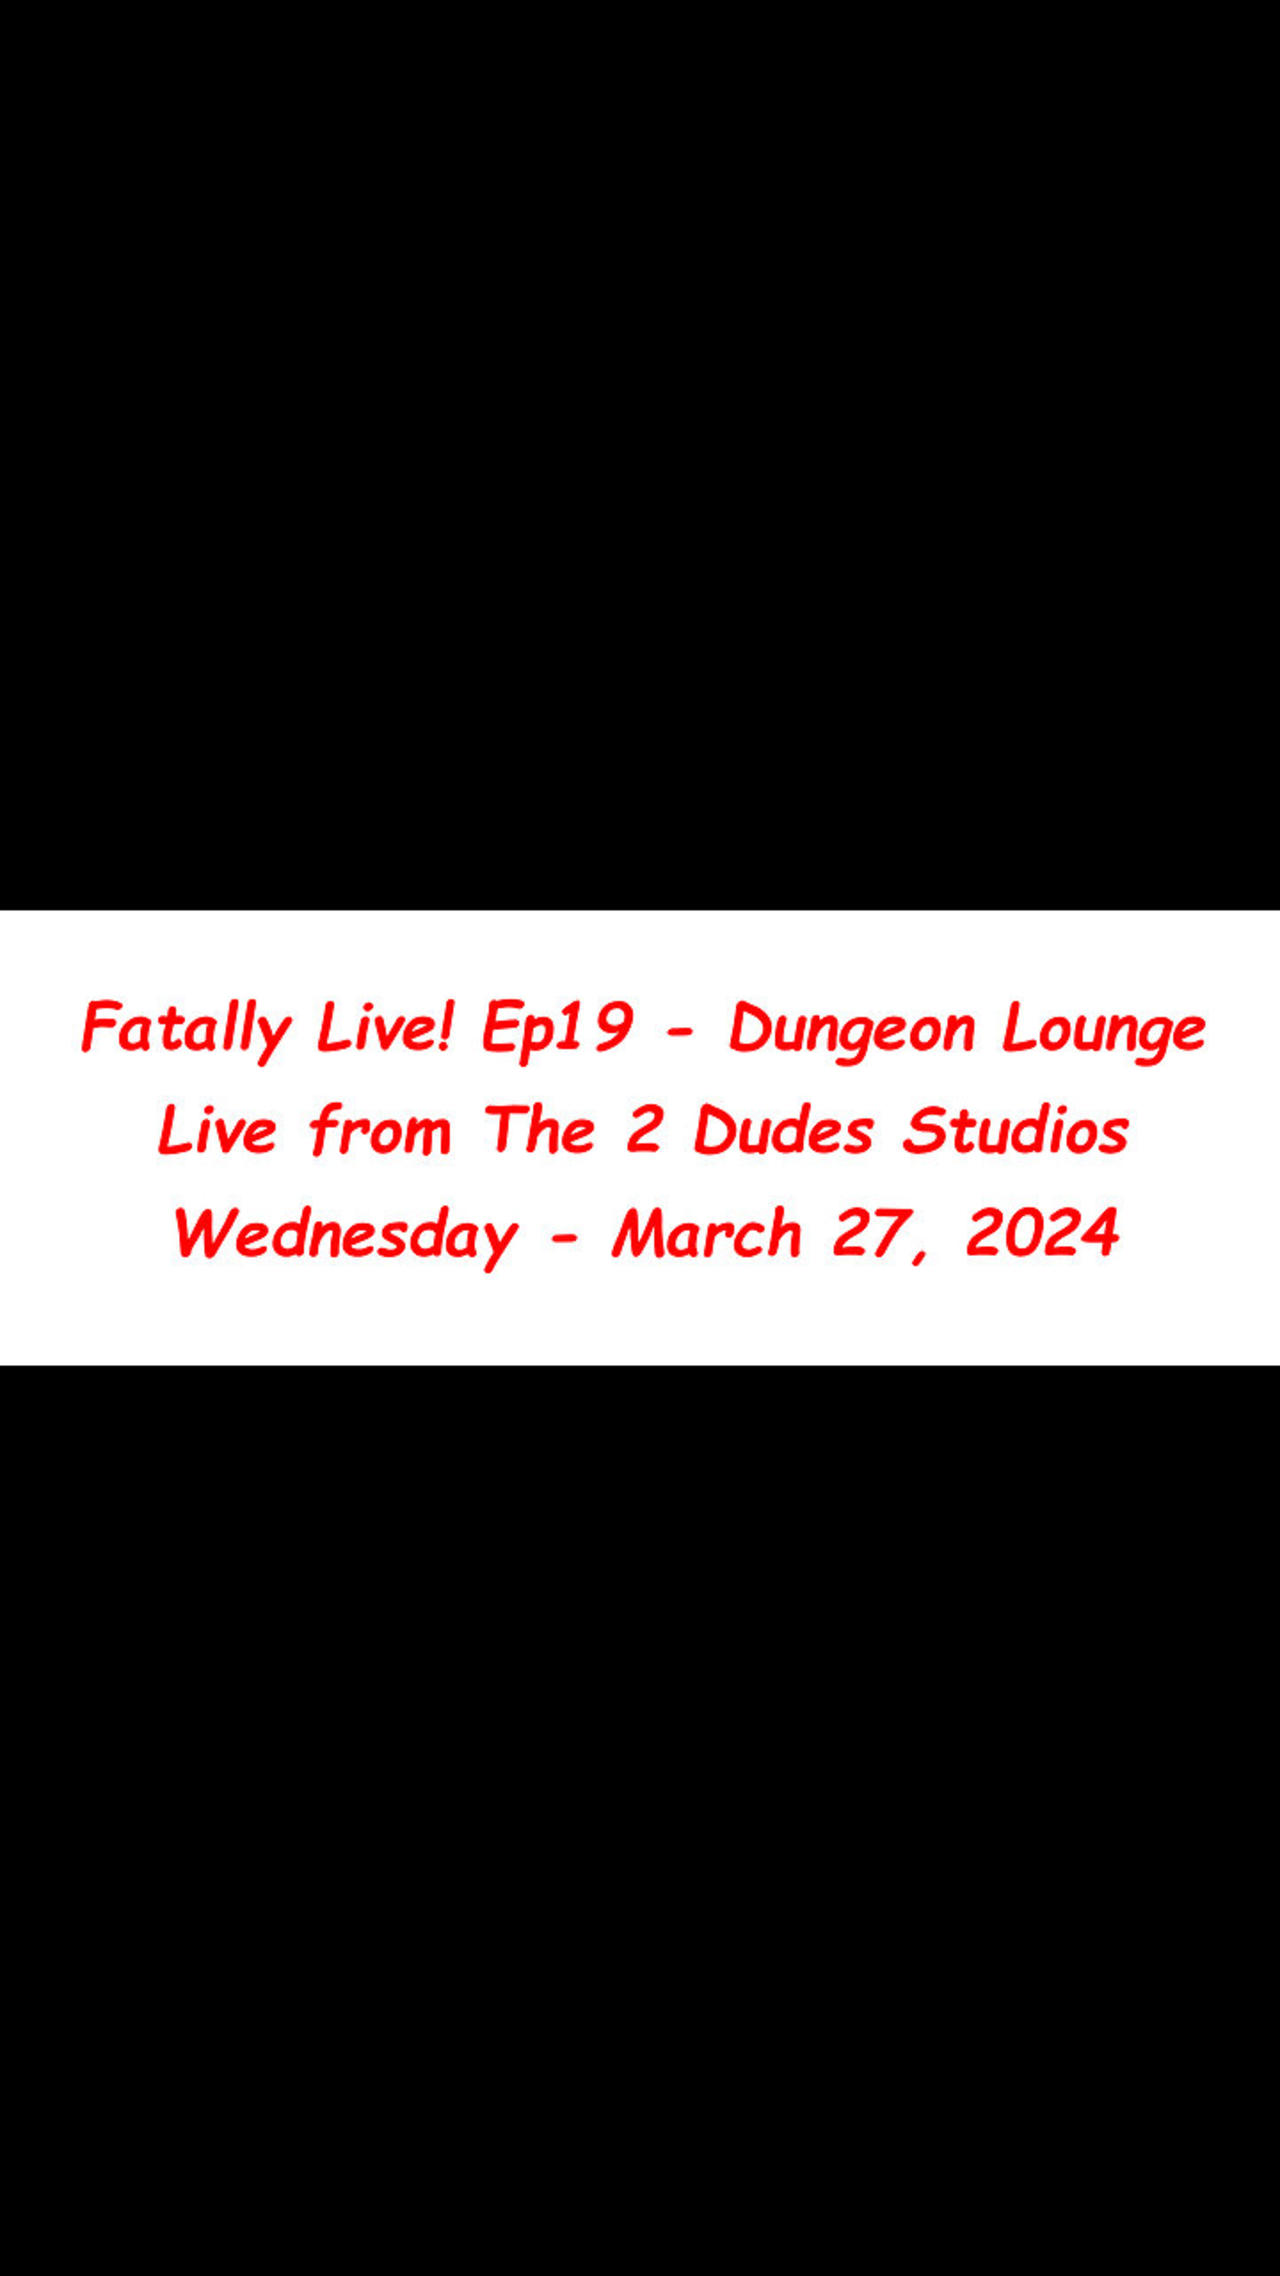 Fatally Live! Ep19 - Dungeon Lounge - Live from The 2 Dudes Studios